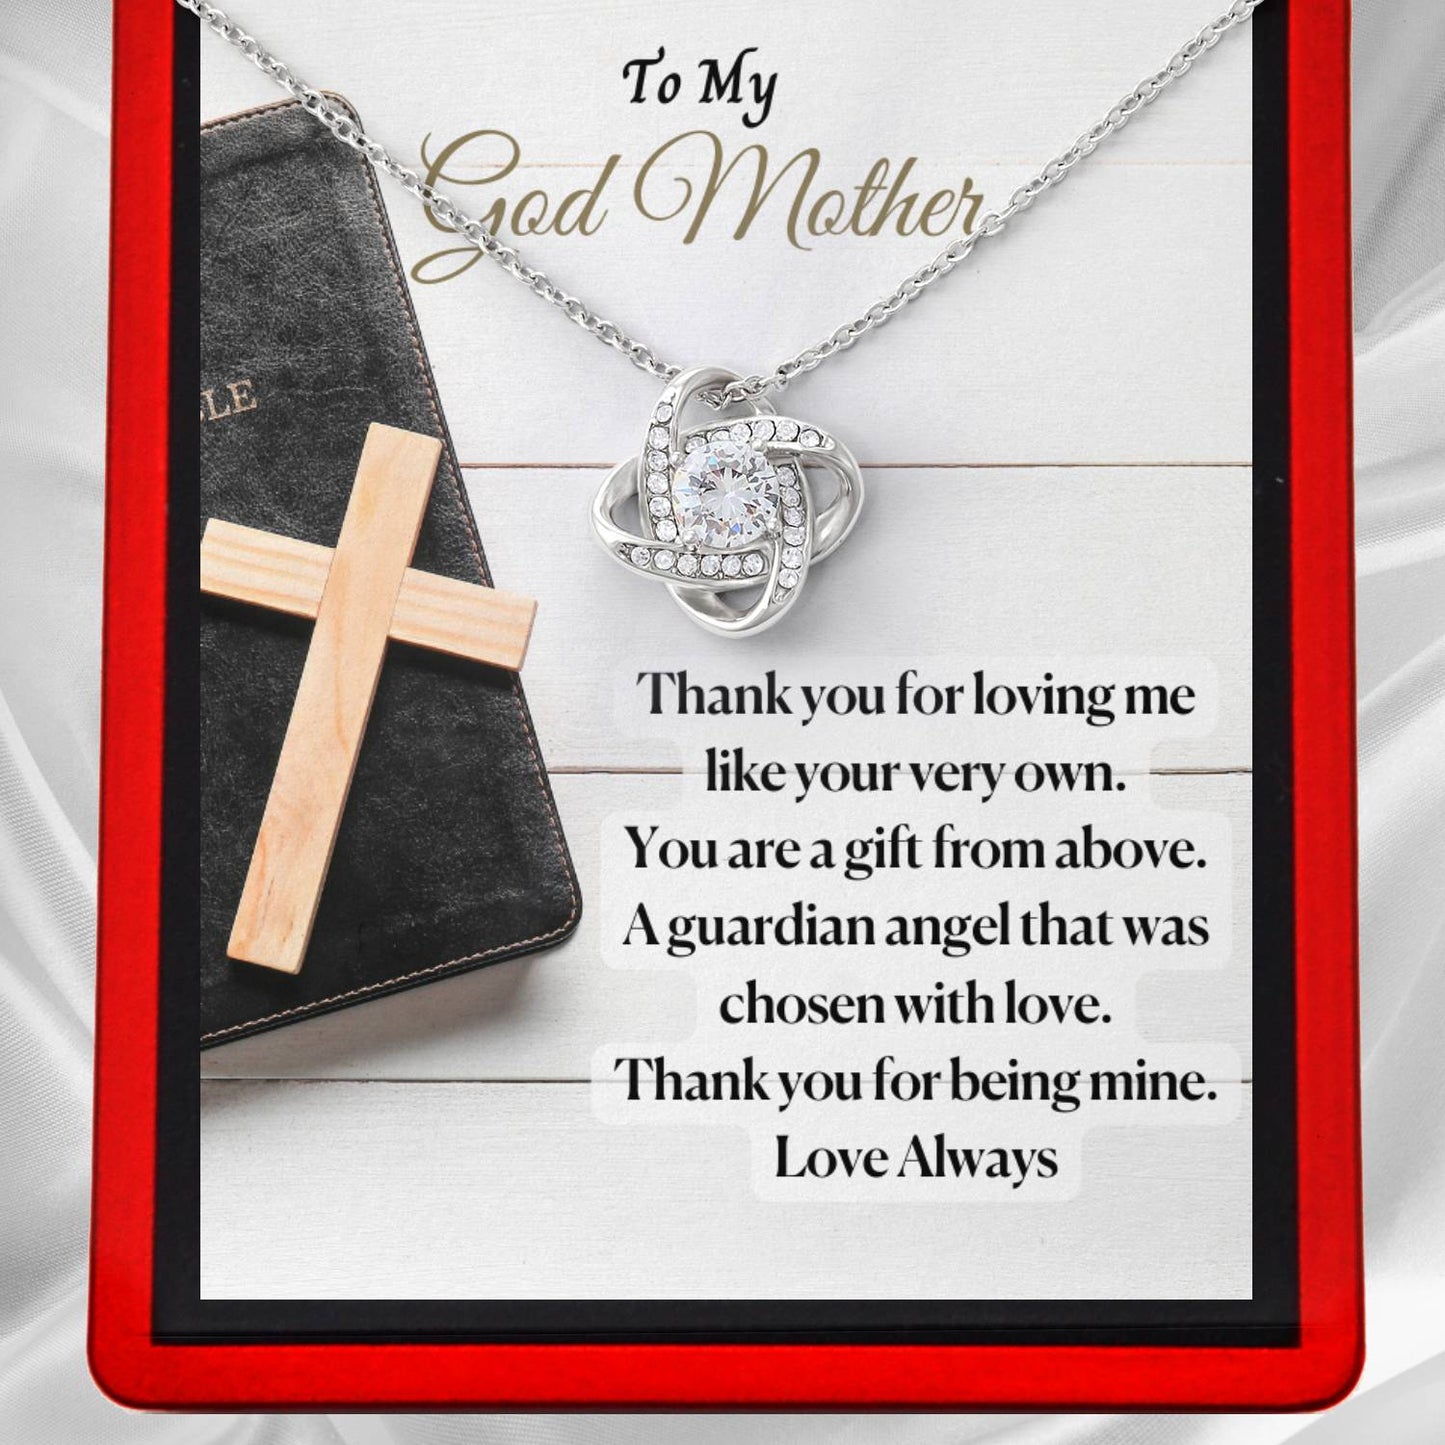 Load image into Gallery viewer, God Mother Necklace/Gift - Sterling Silver Love Knot Necklace - GodMother1
